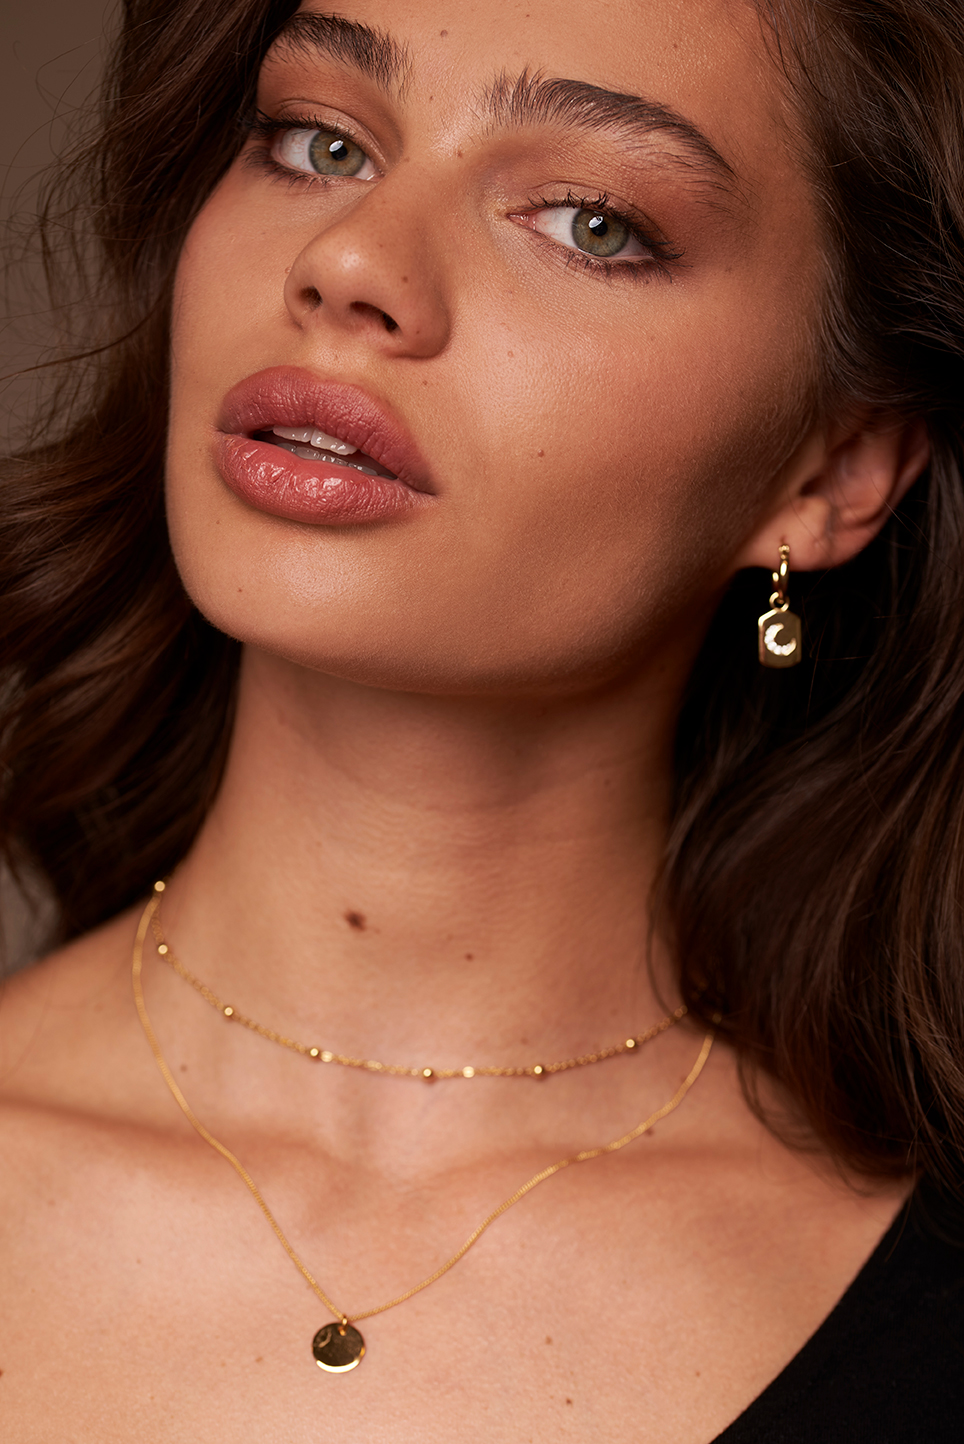 Model on a dark beige background showcasing different jewellery pieces.